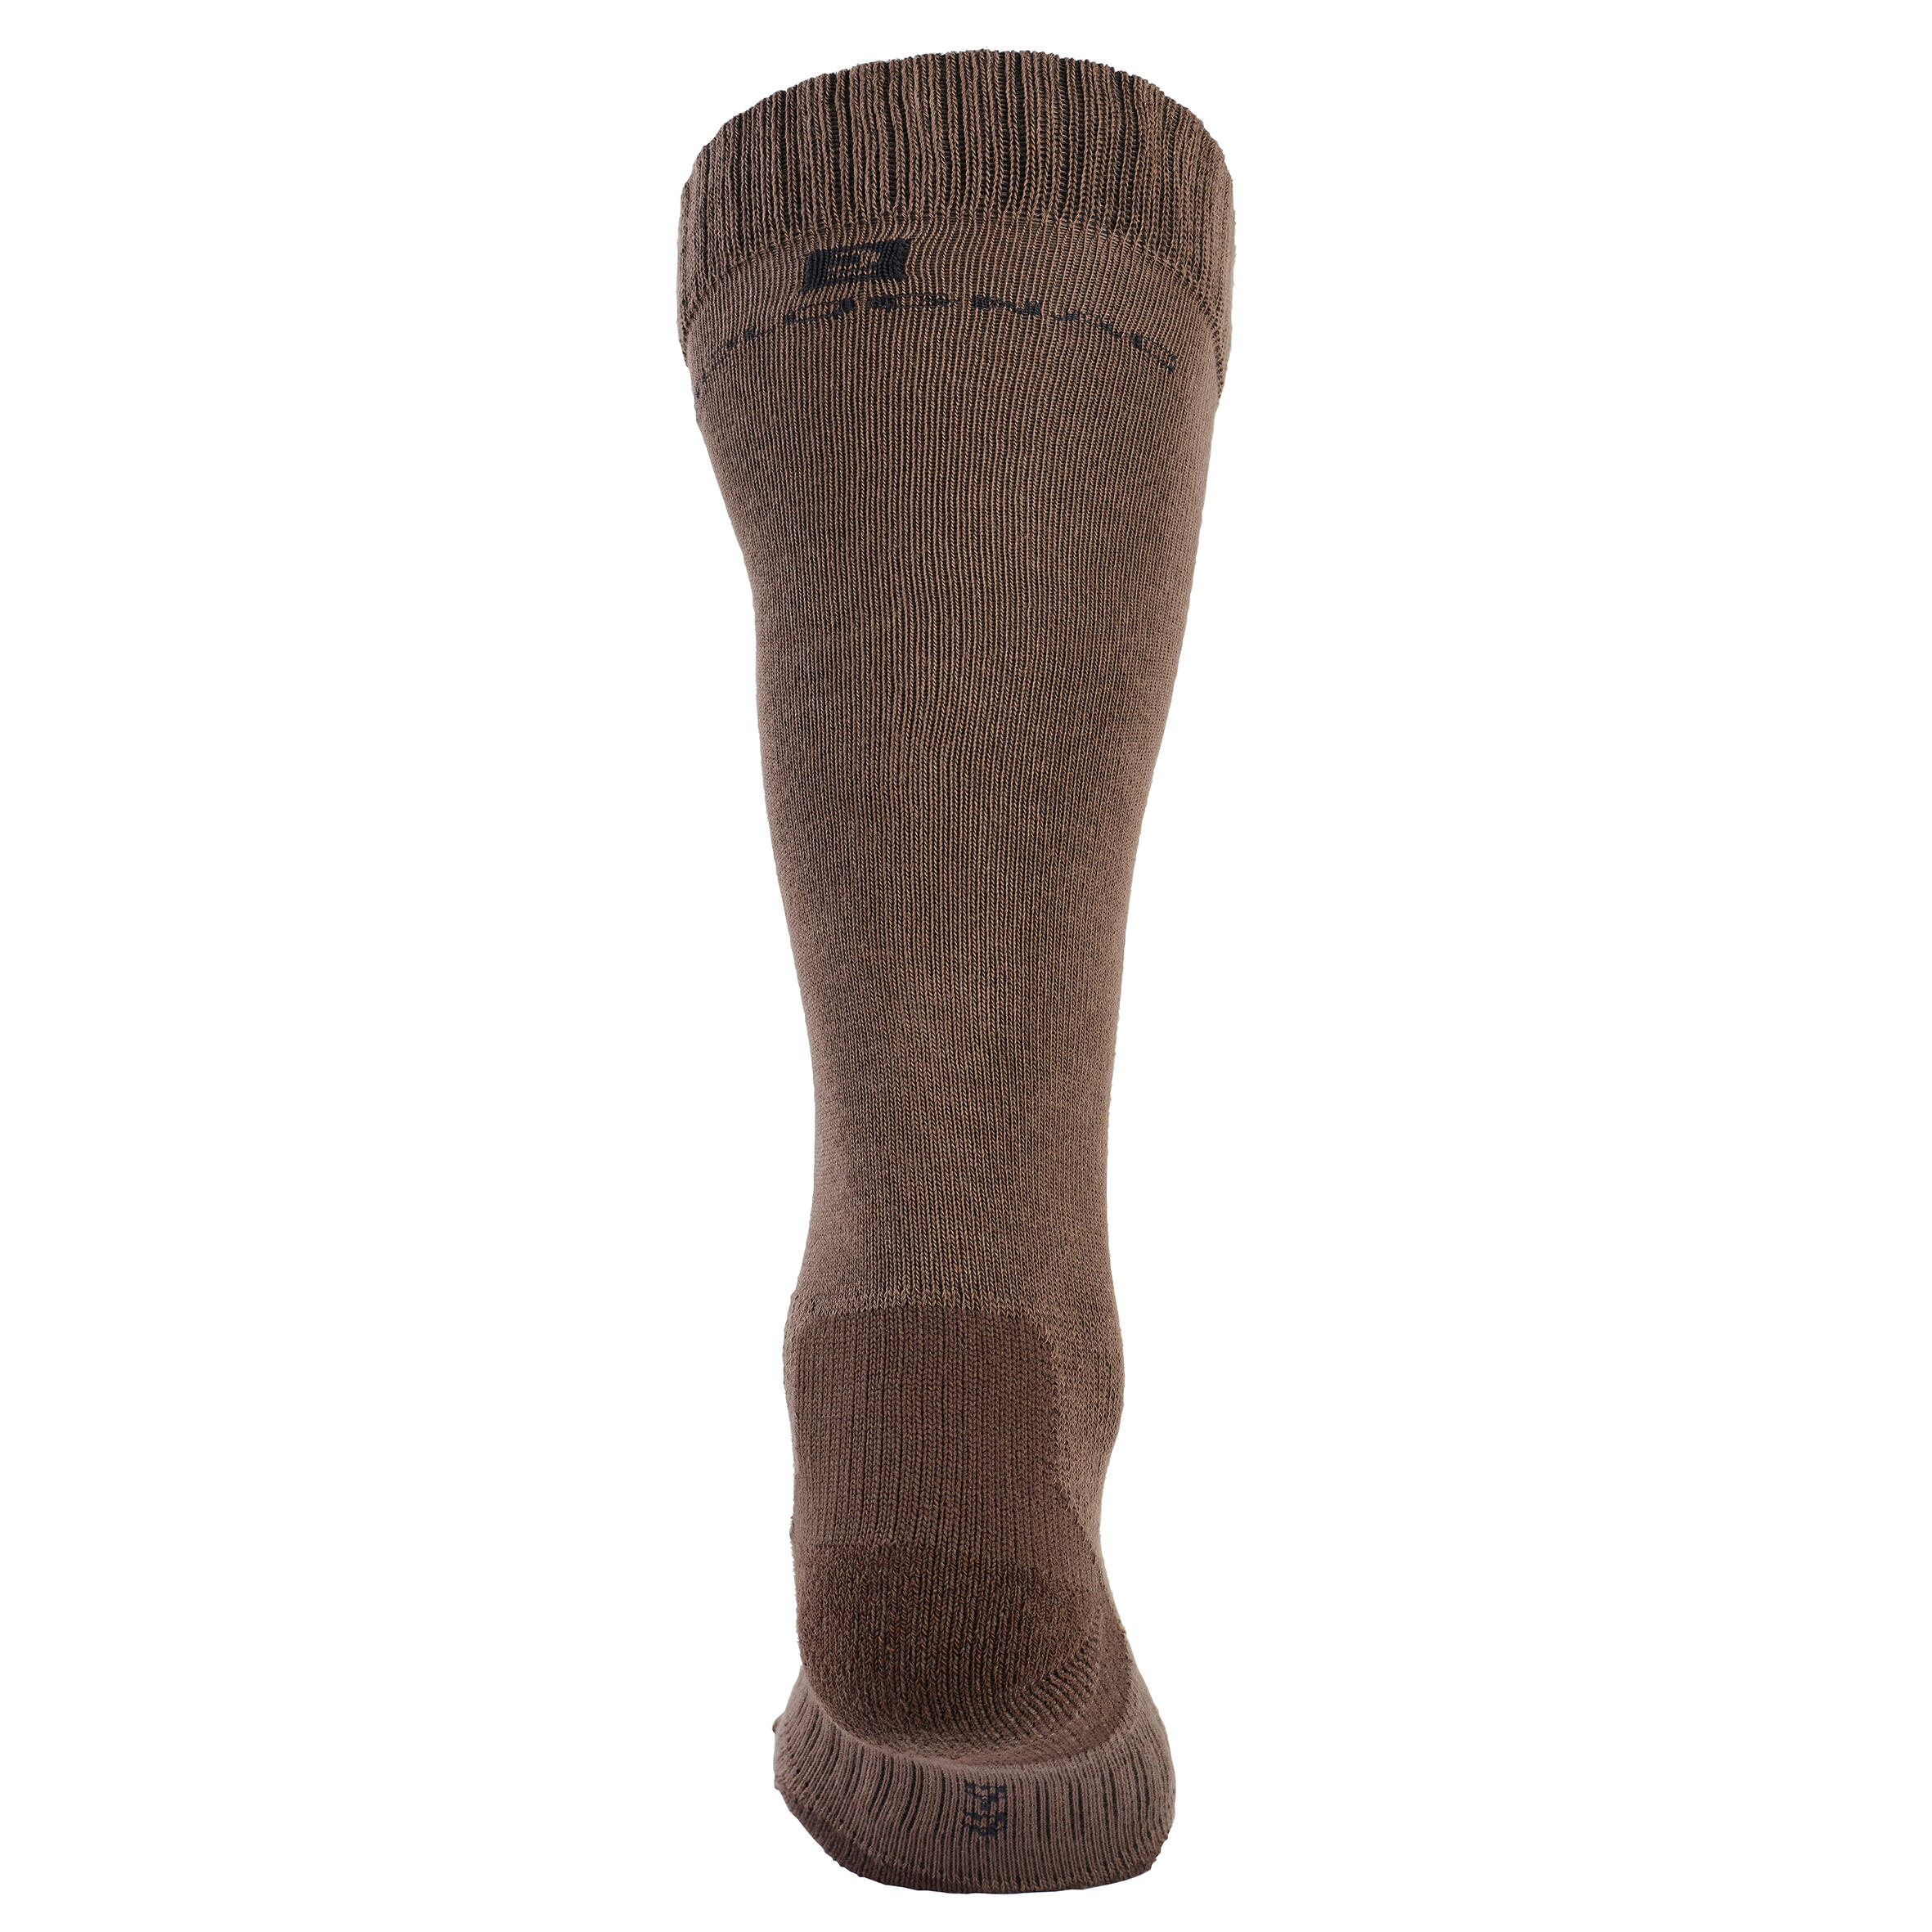 PACK OF 2 PAIRS OF BREATHABLE TALL HUNTING SOCKS 100 6/10